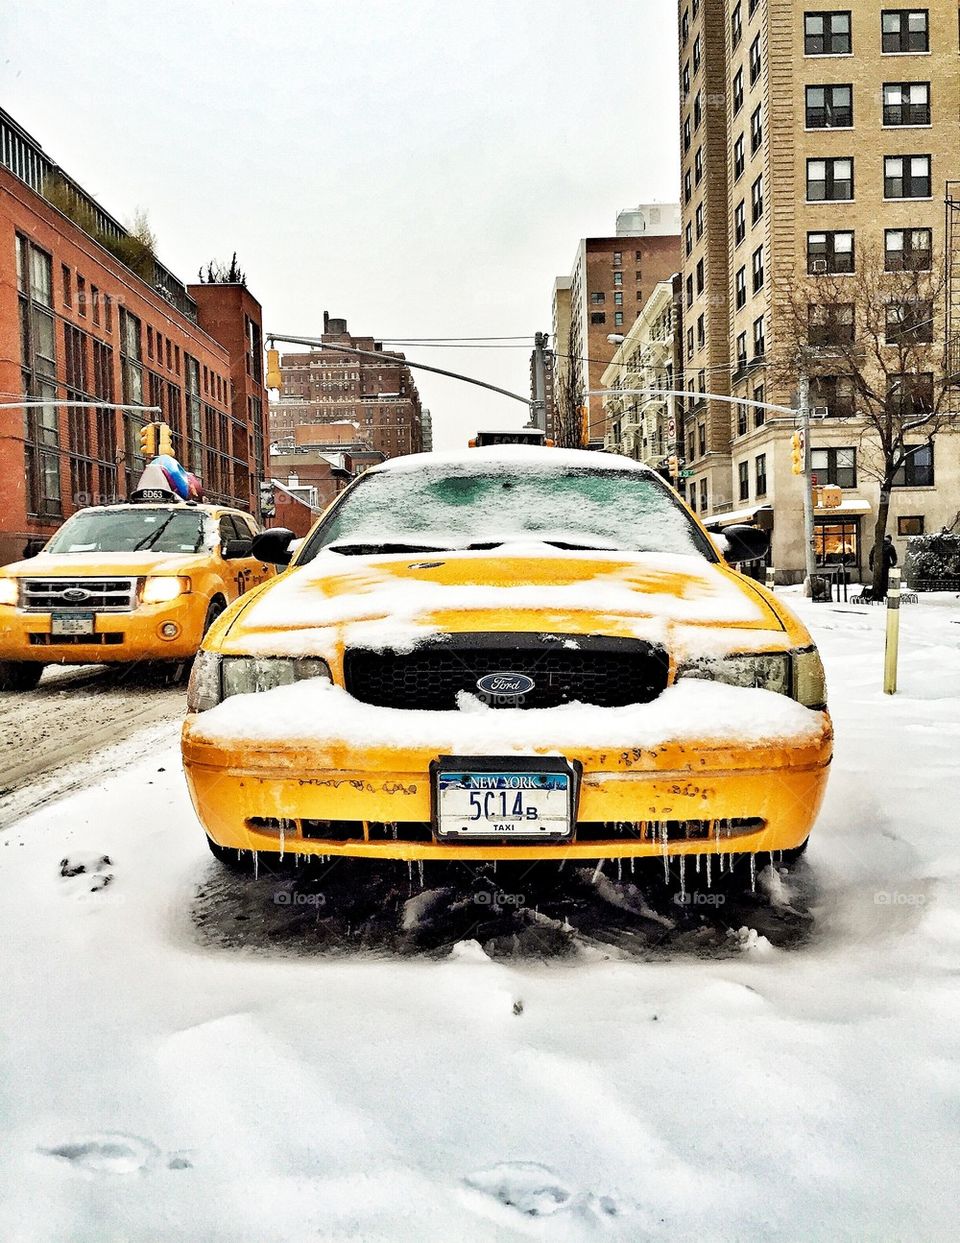 Fresh Snow Fall and New York Cabs